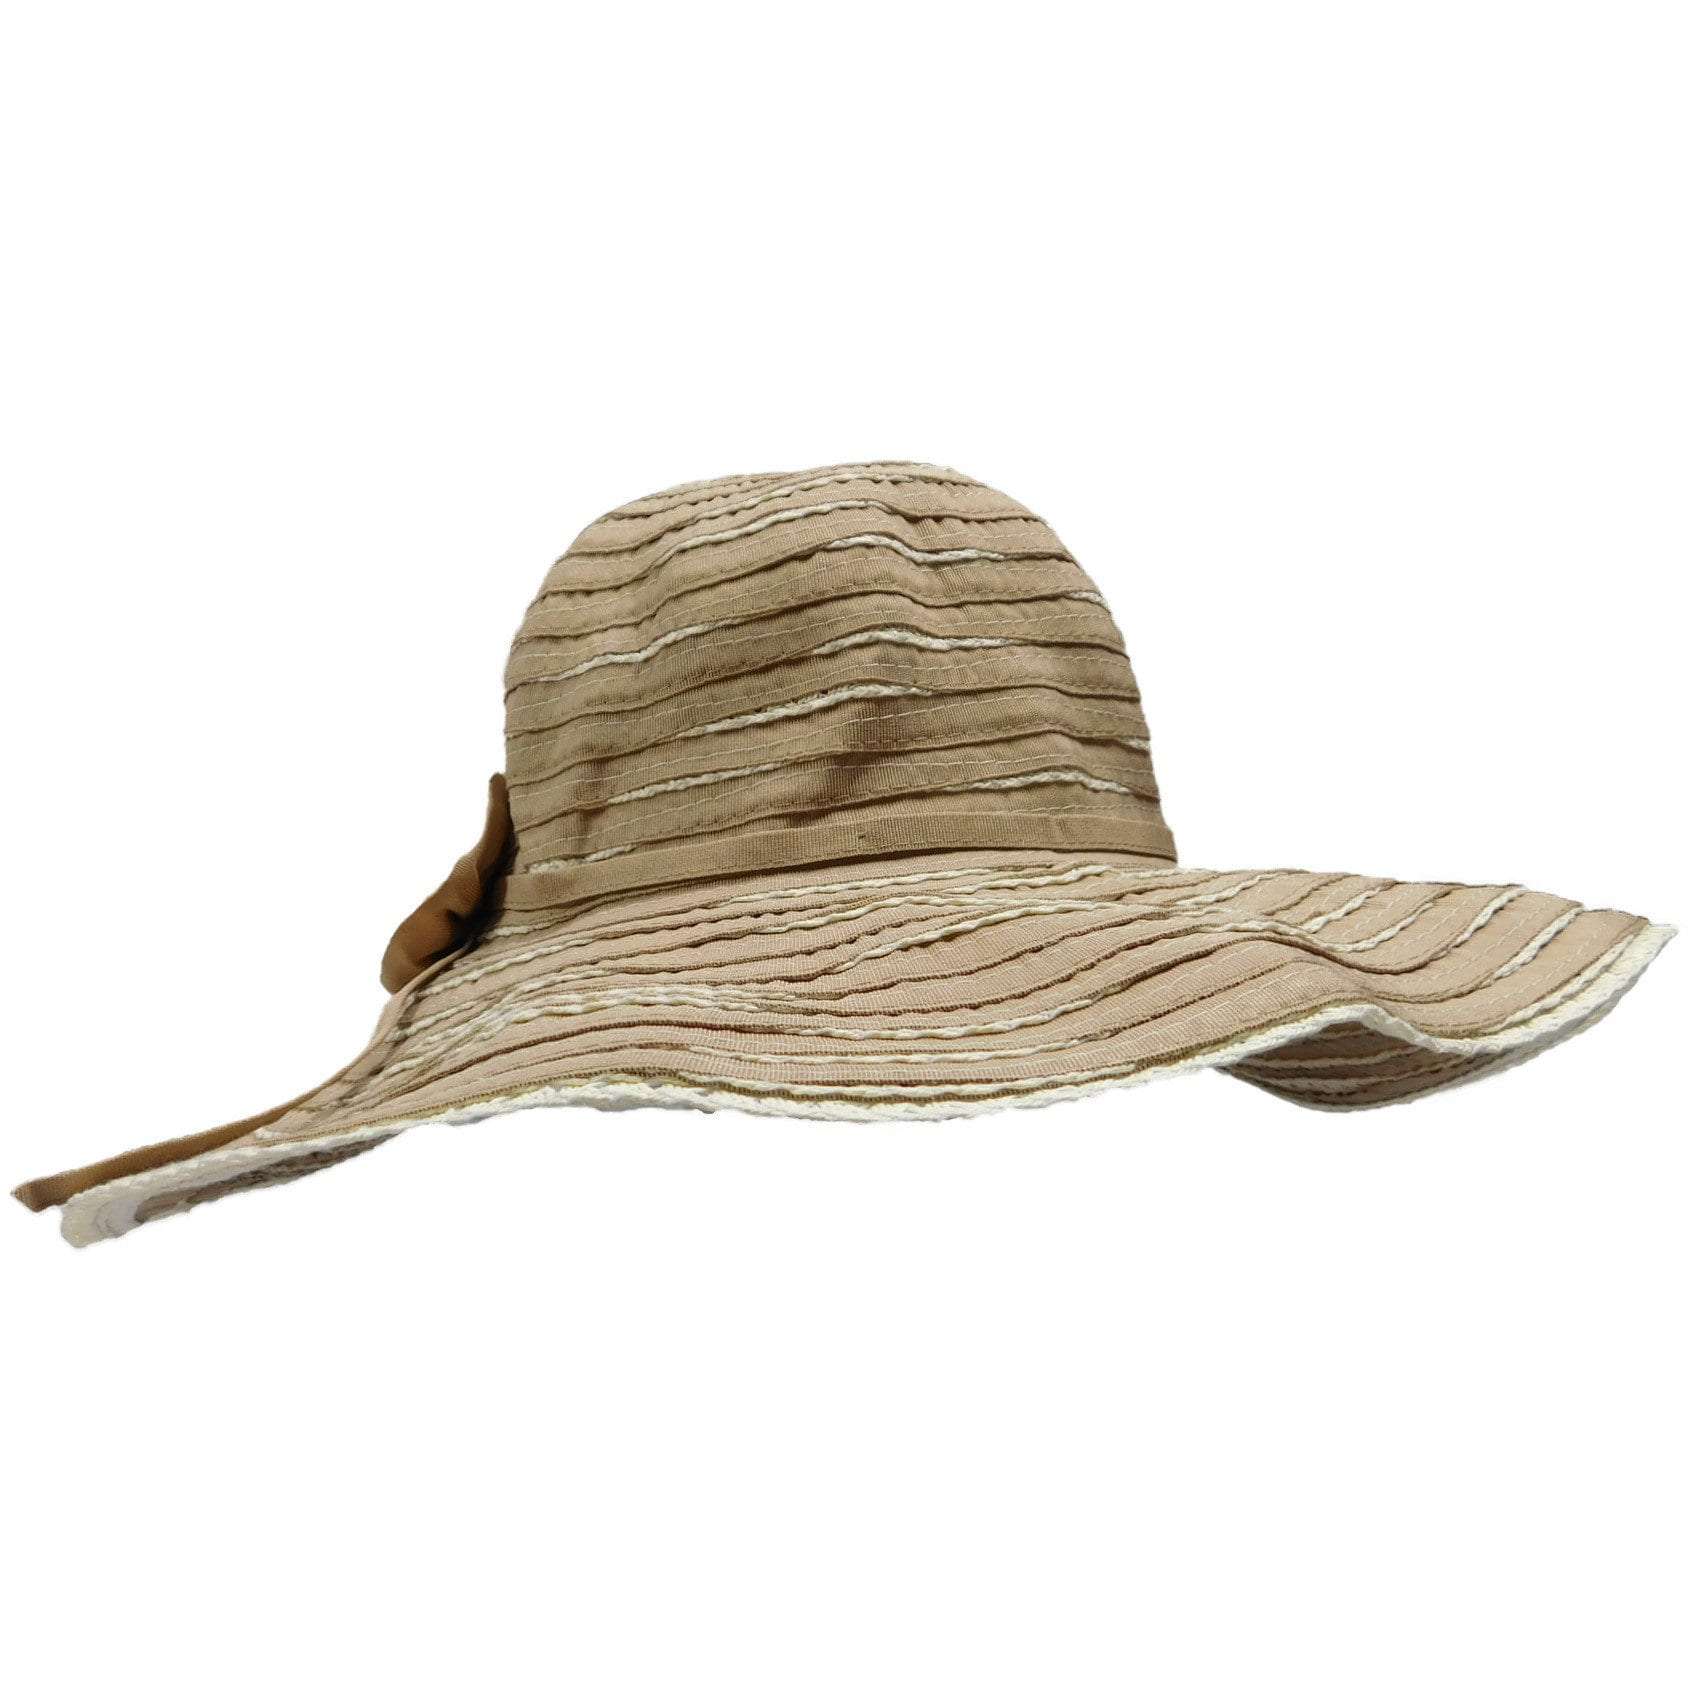 Spiral Sewn Ribbon and Straw Sun Hat by JSA for Women Floppy Hat Jeanne Simmons WSPS466TP Taupe  